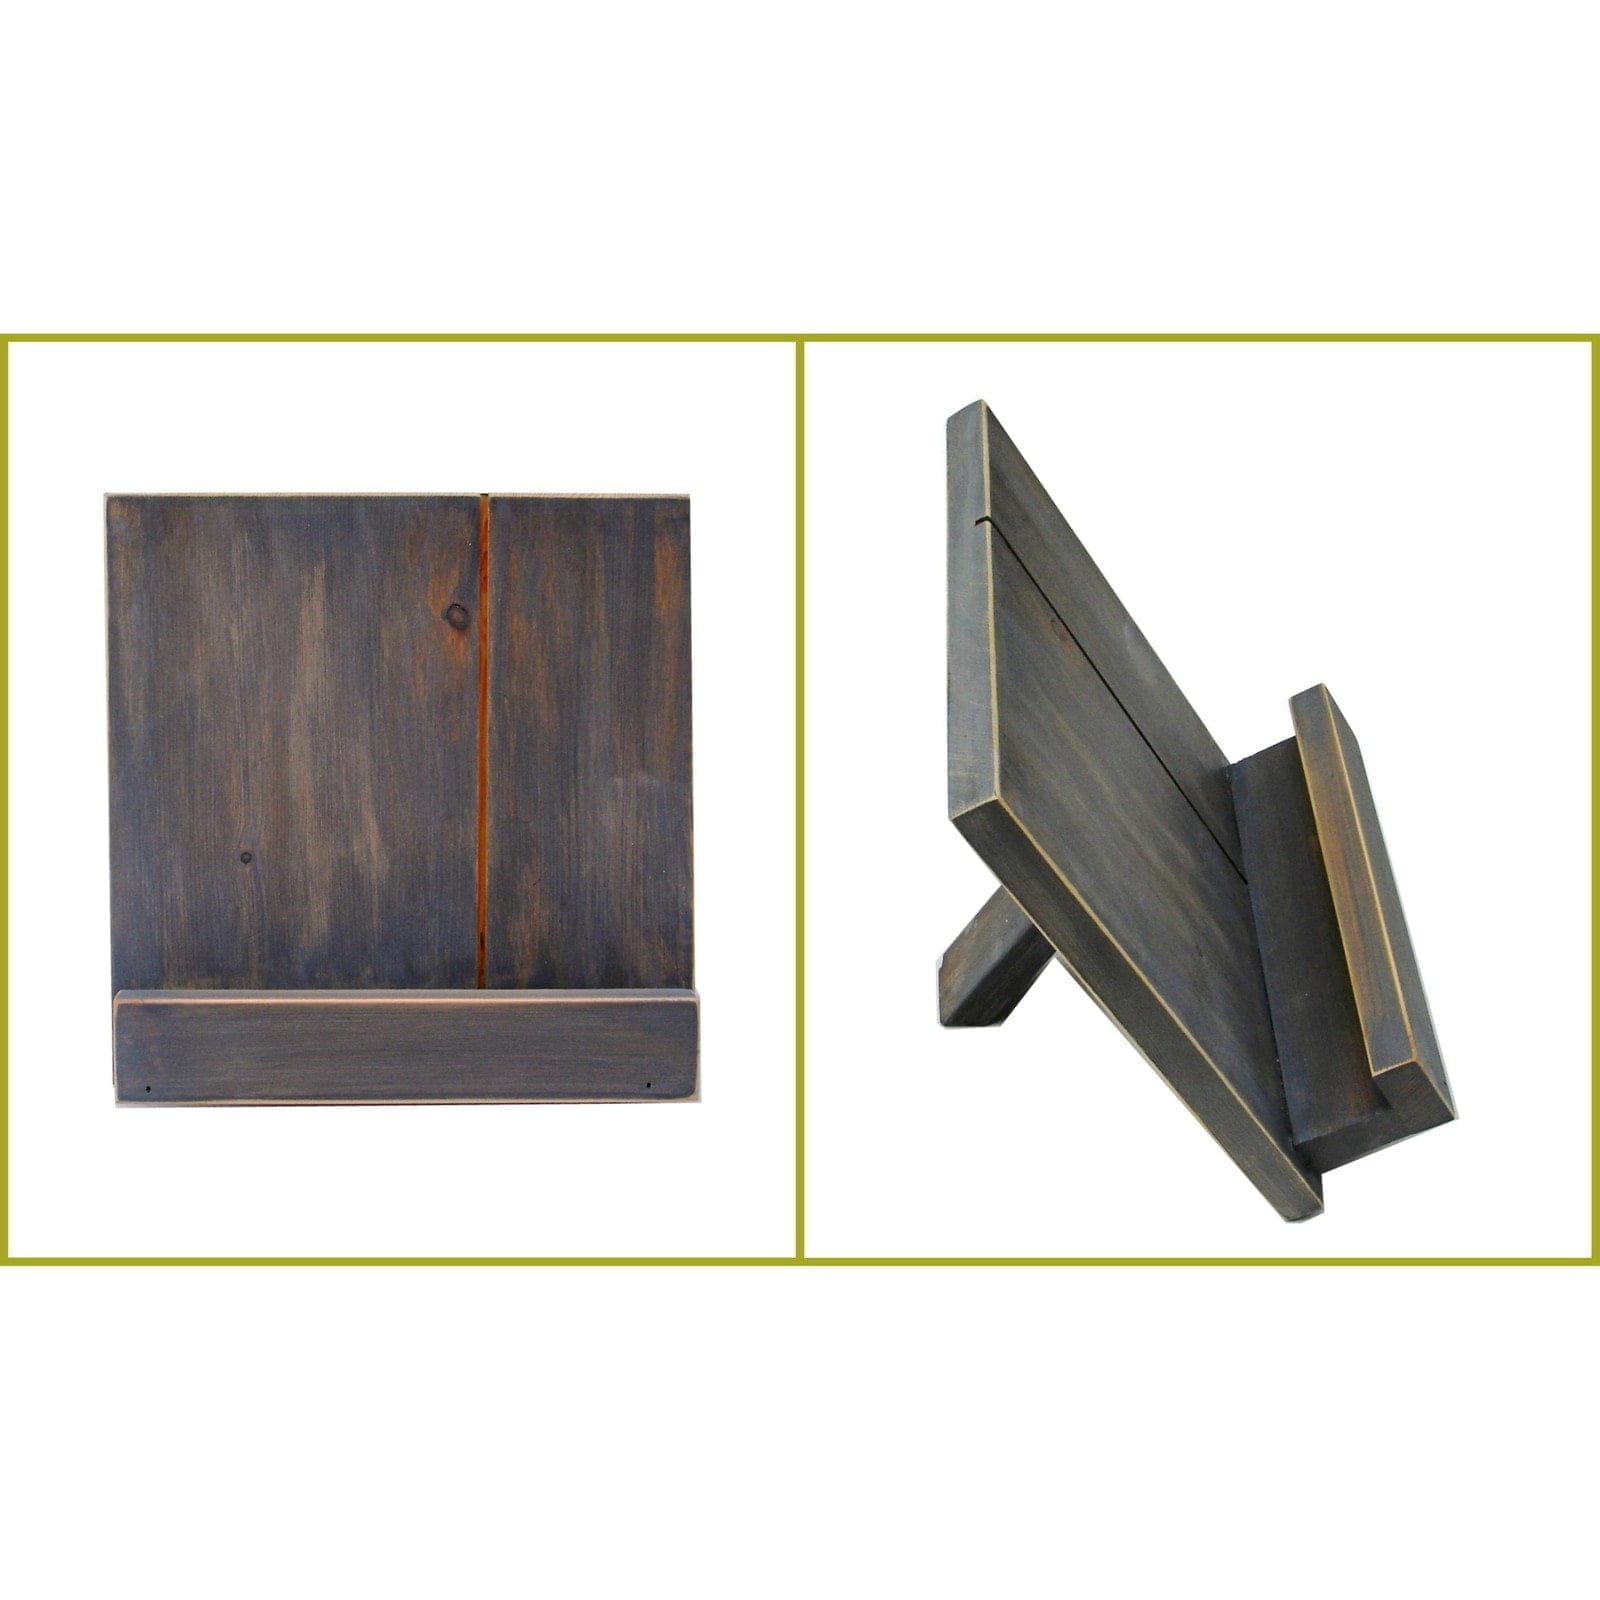 Wood Wooden tablet or book stand